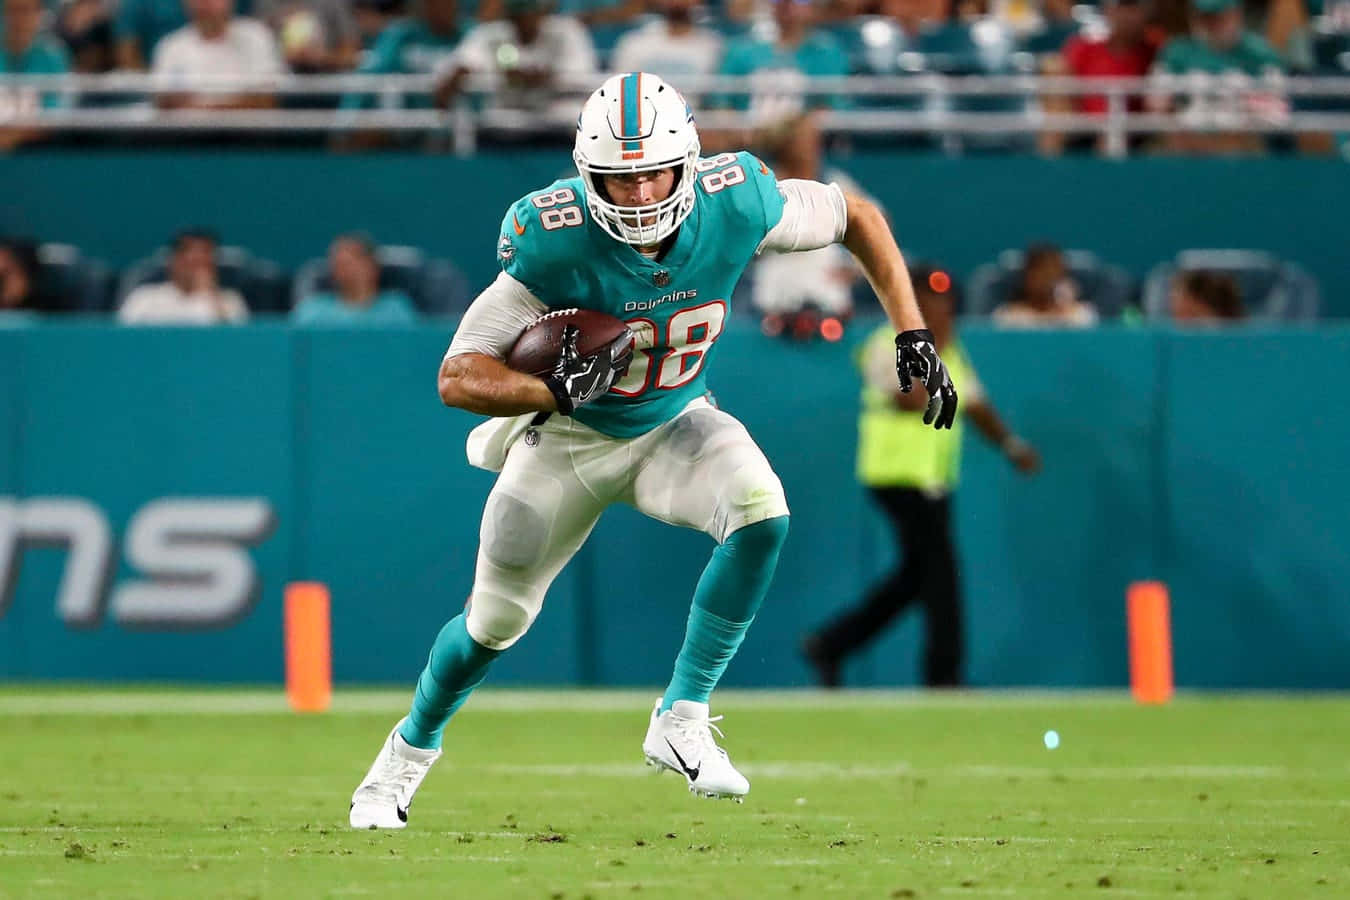 Mike Gesicki Dolphins Game Action Wallpaper